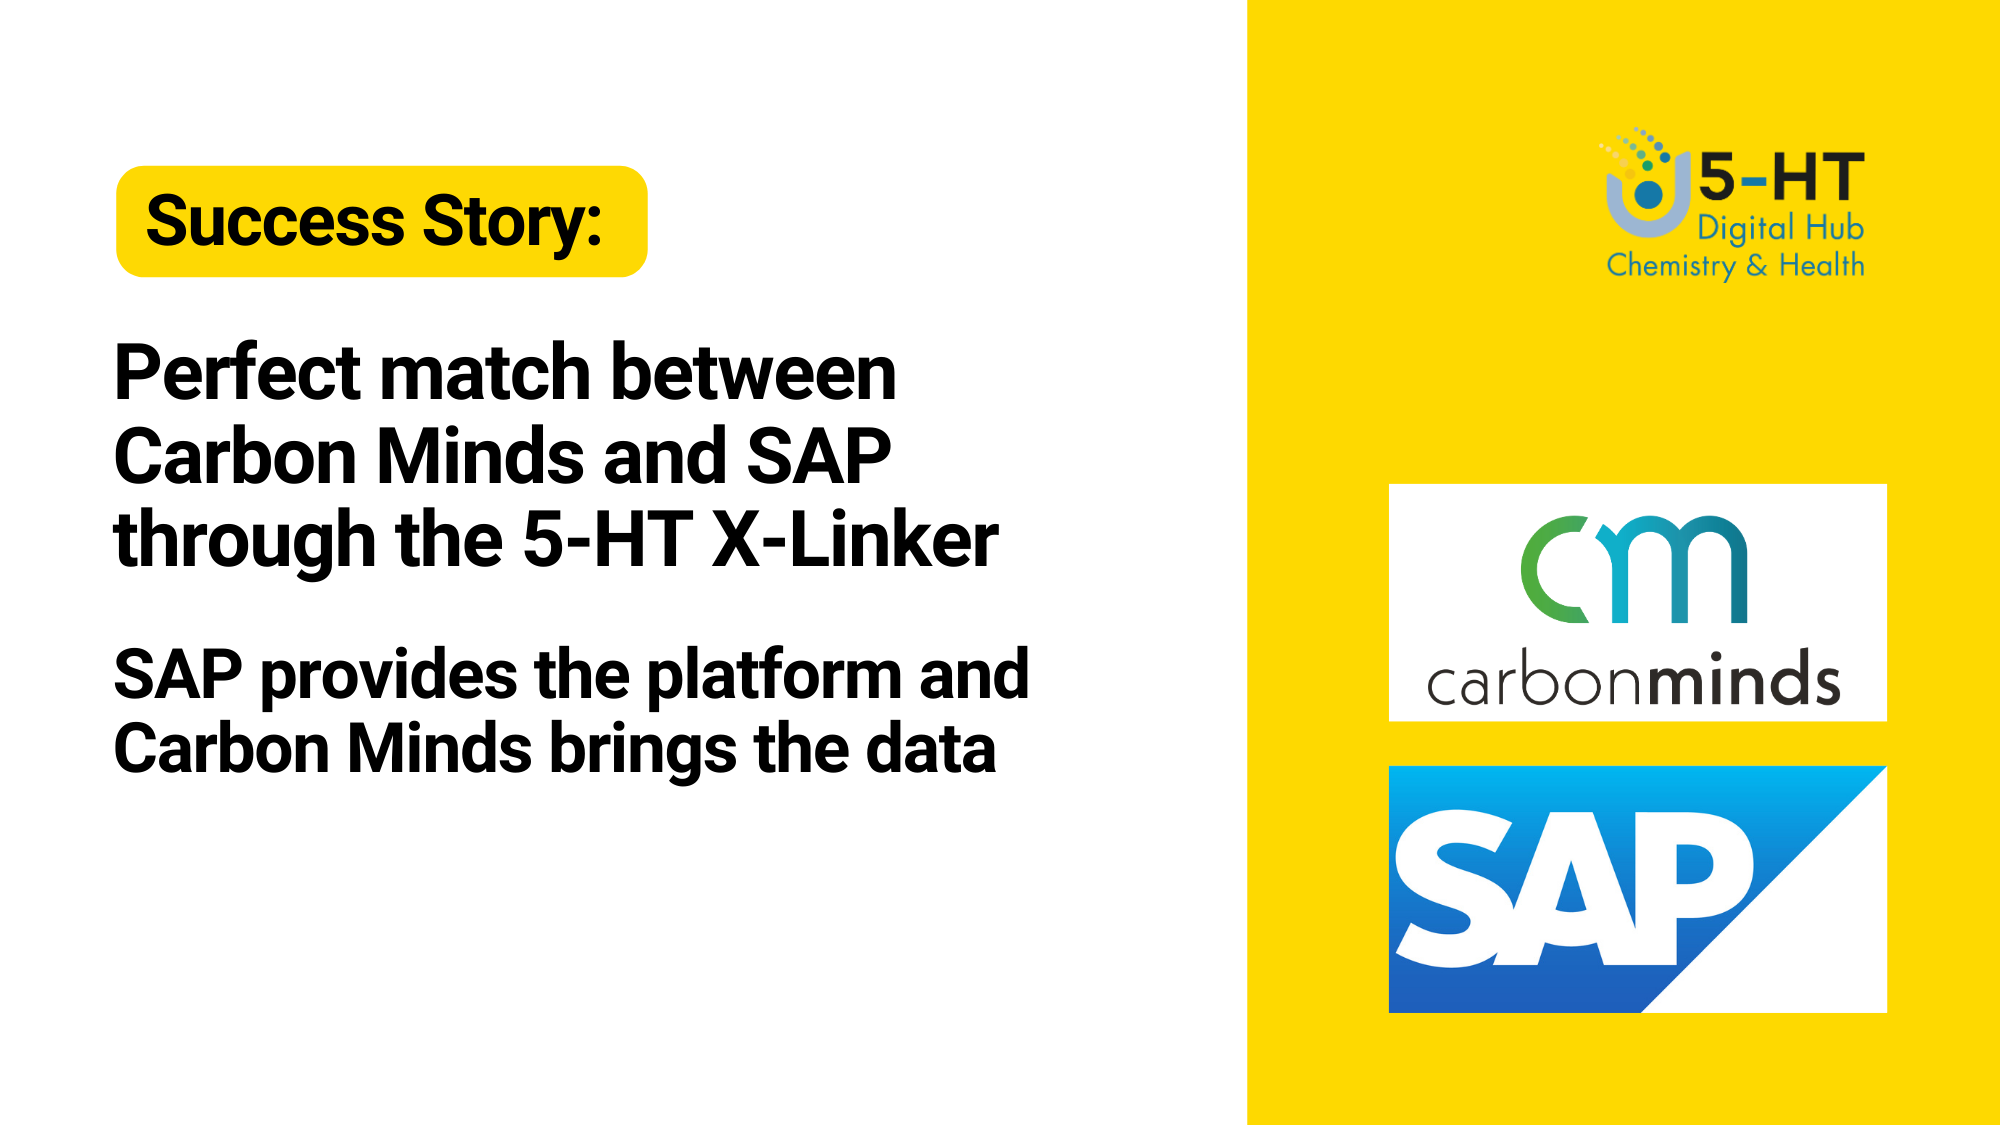 Perfect match between Carbon Minds and SAP through the 5-HT X-Linker - SAP provides the platform and Carbon Minds brings the data